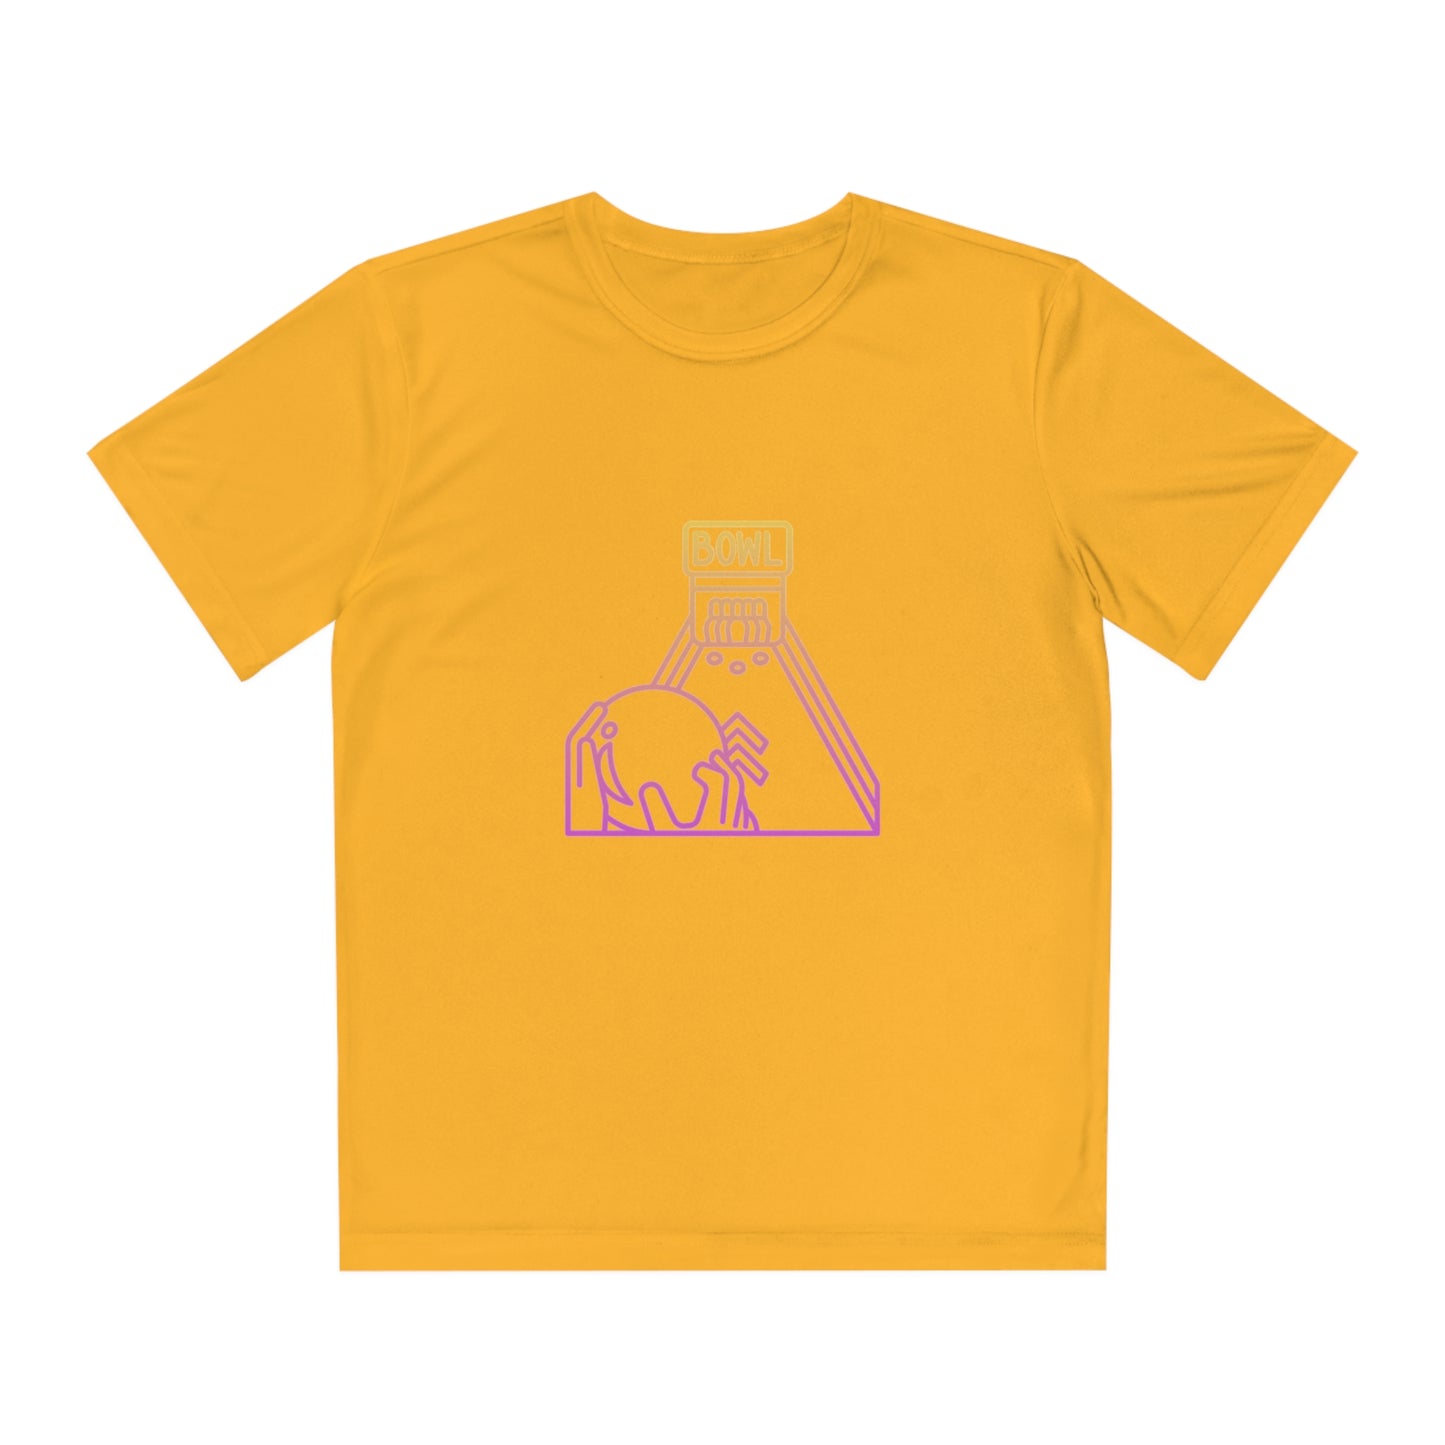 Youth Competitor Tee #1: Bowling